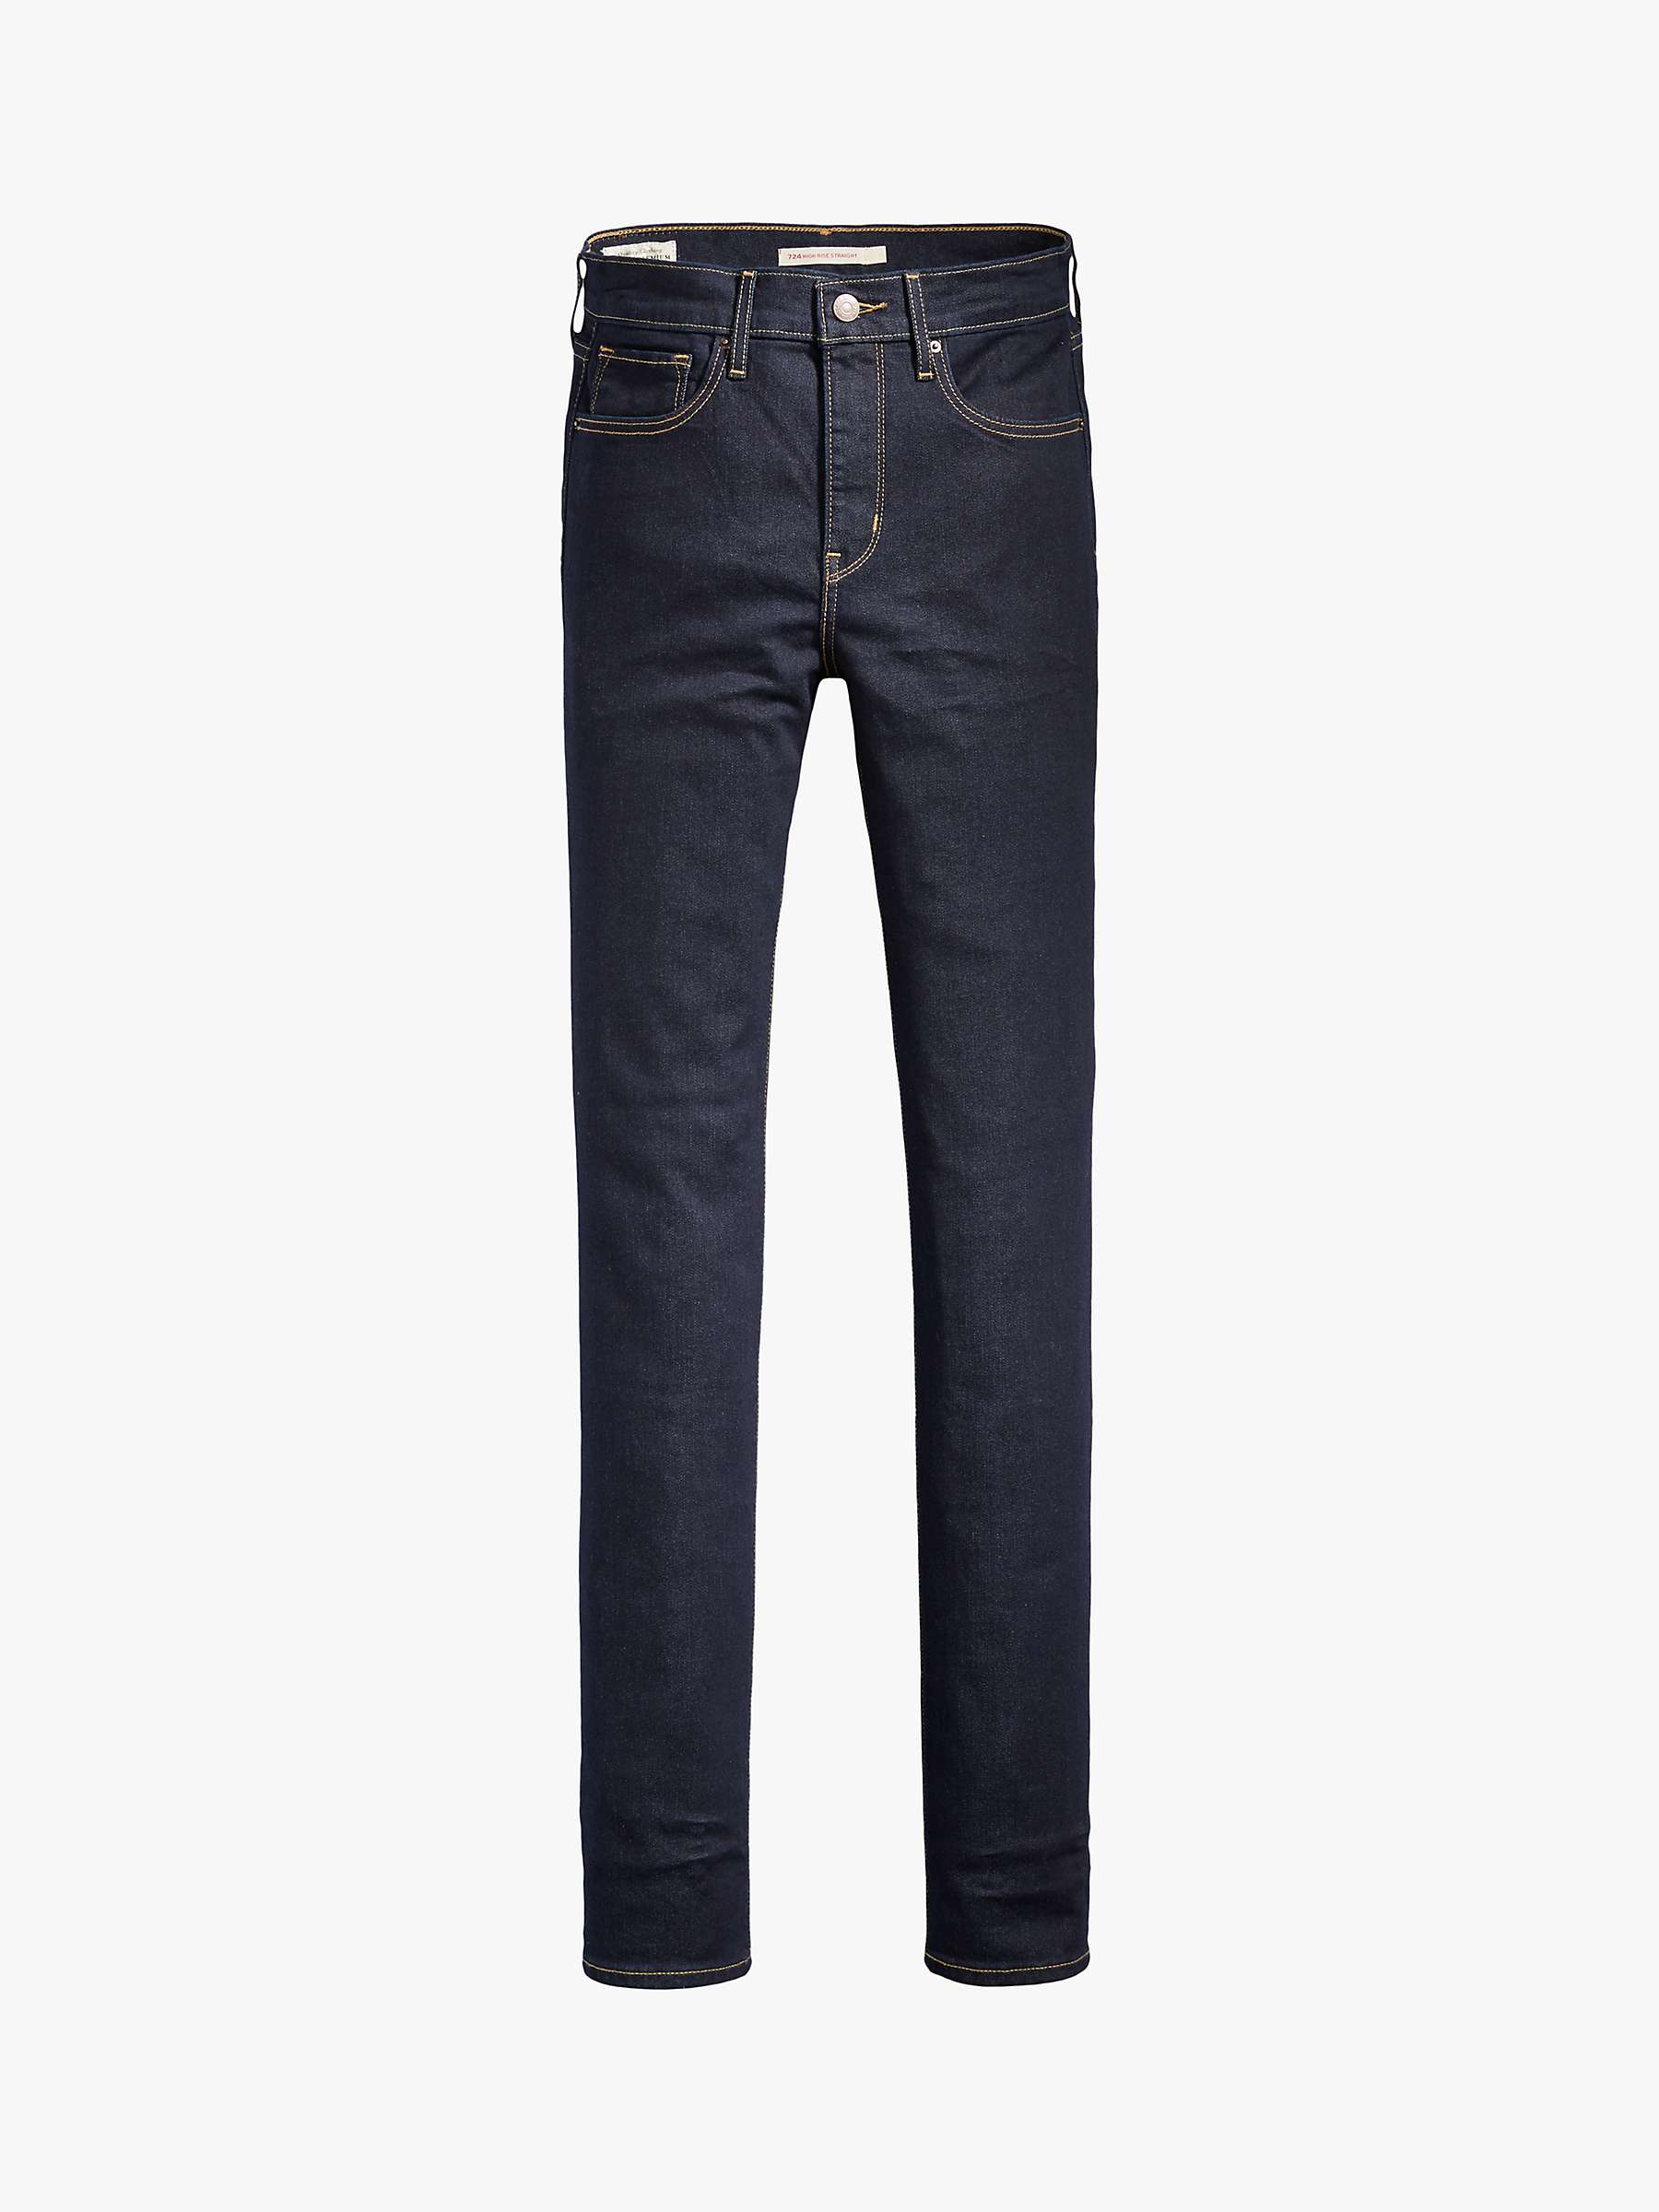 Buy Levi's 724 High Rise Straight Cut Jeans, To The Nine Online at johnlewis.com